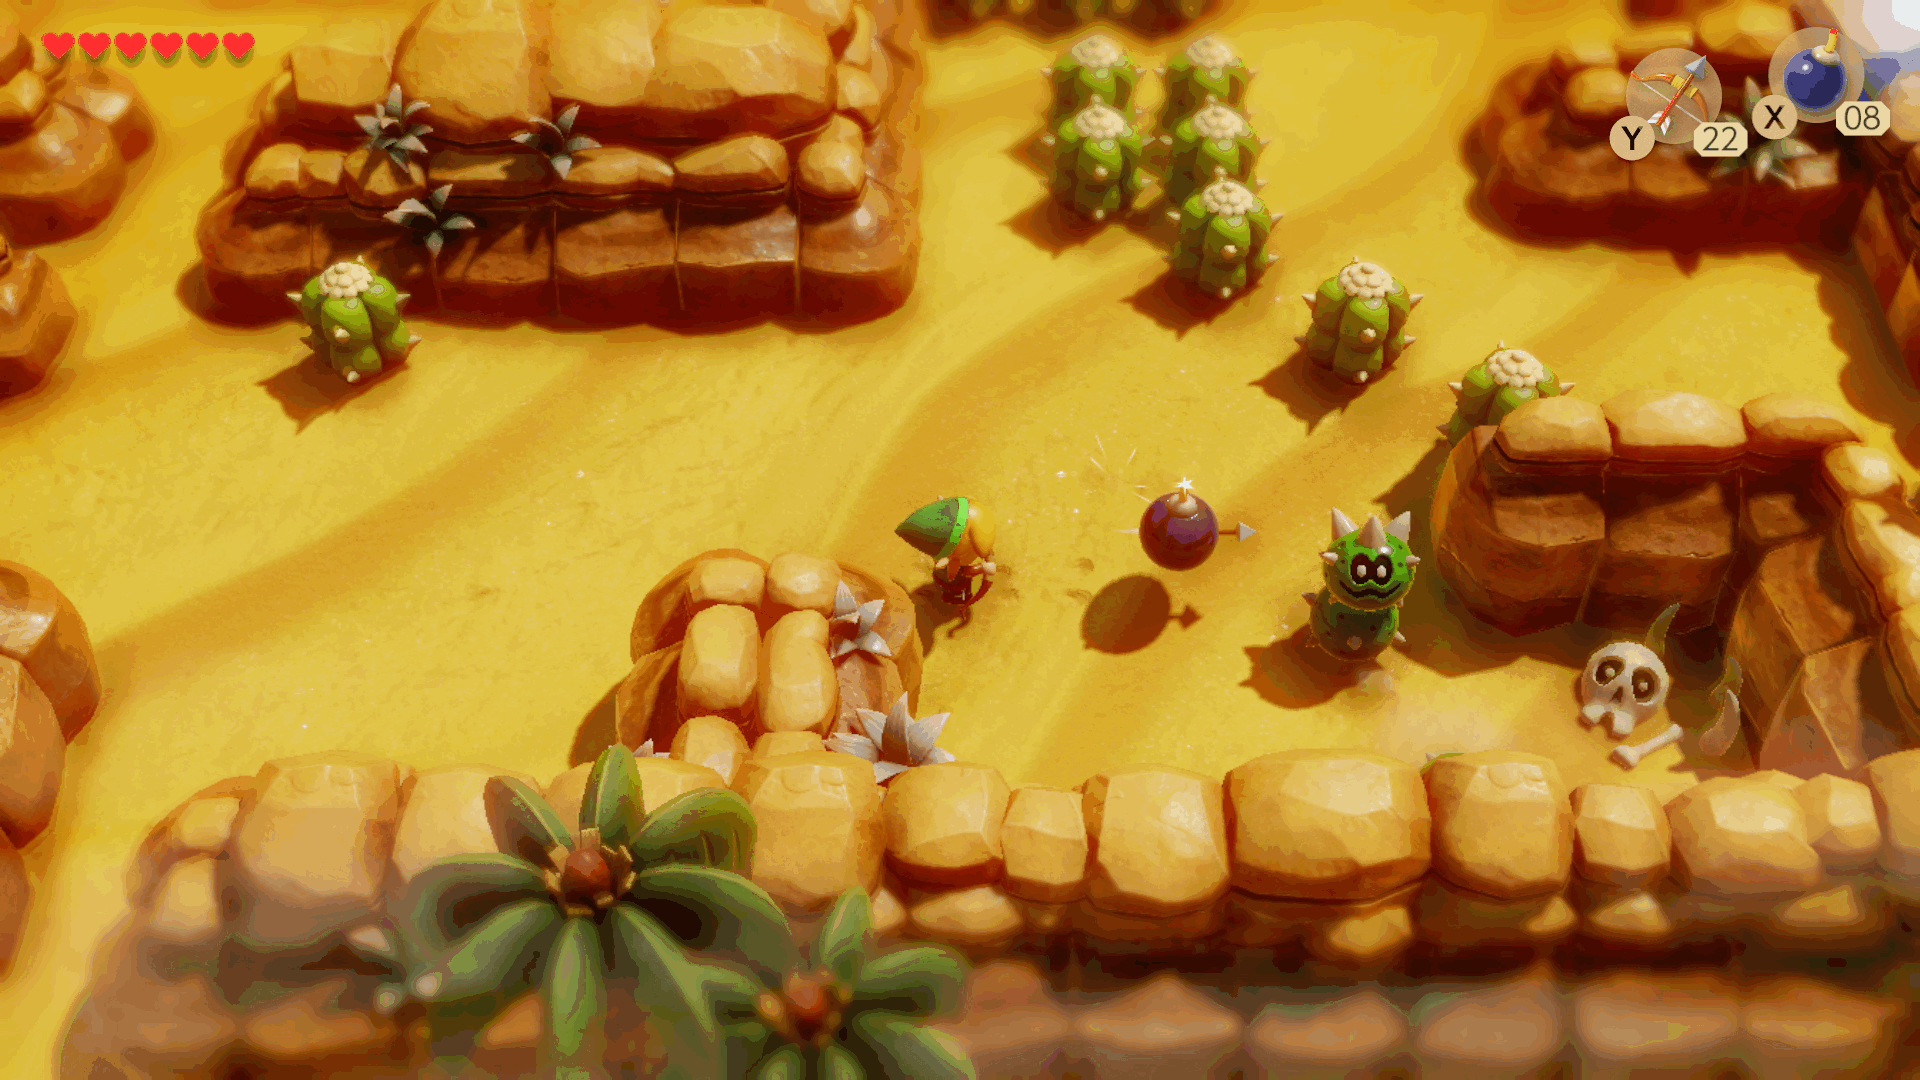 The Legend of Zelda: Link's Awakening Switch Remake Release Date Announced  - E3 2019 : r/NintendoSwitch